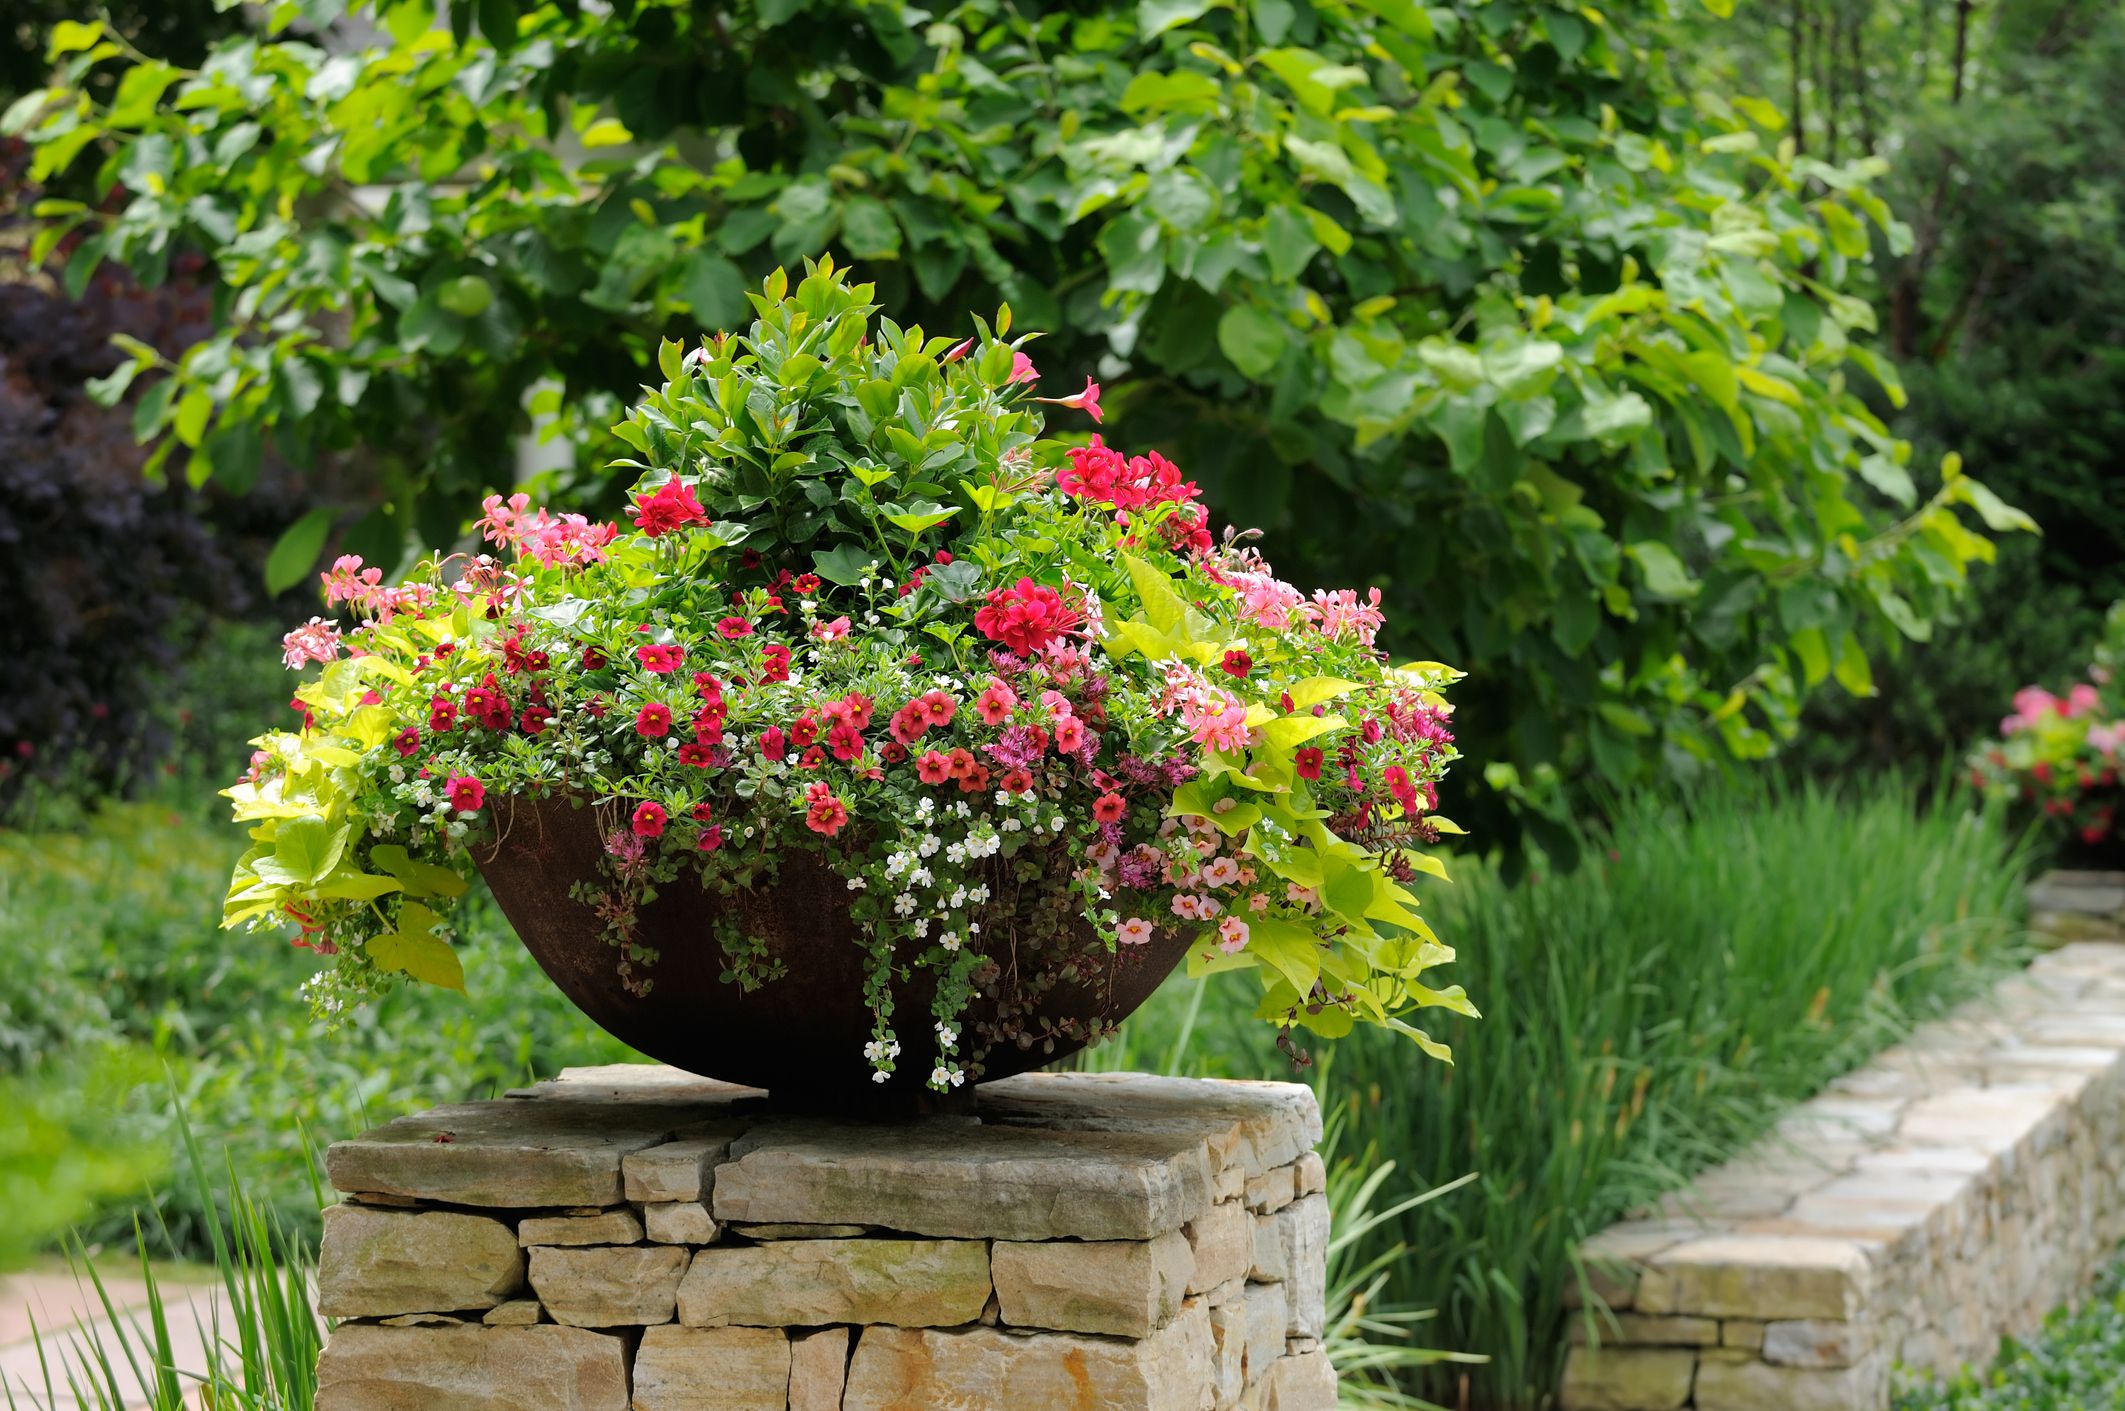 using pots in flower beds